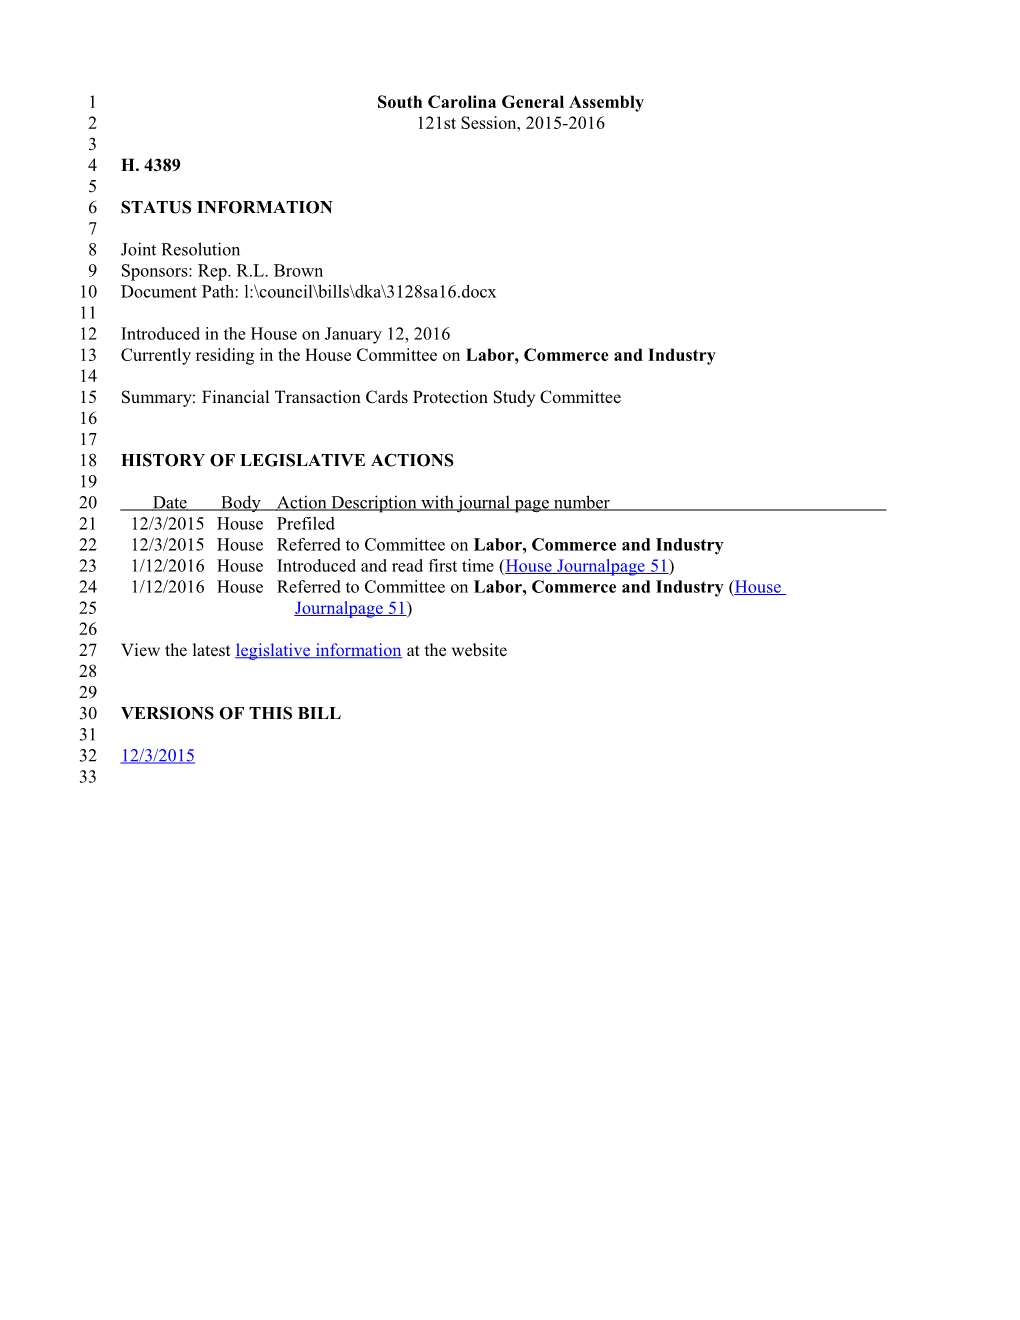 2015-2016 Bill 4389: Financial Transaction Cards Protection Study Committee - South Carolina